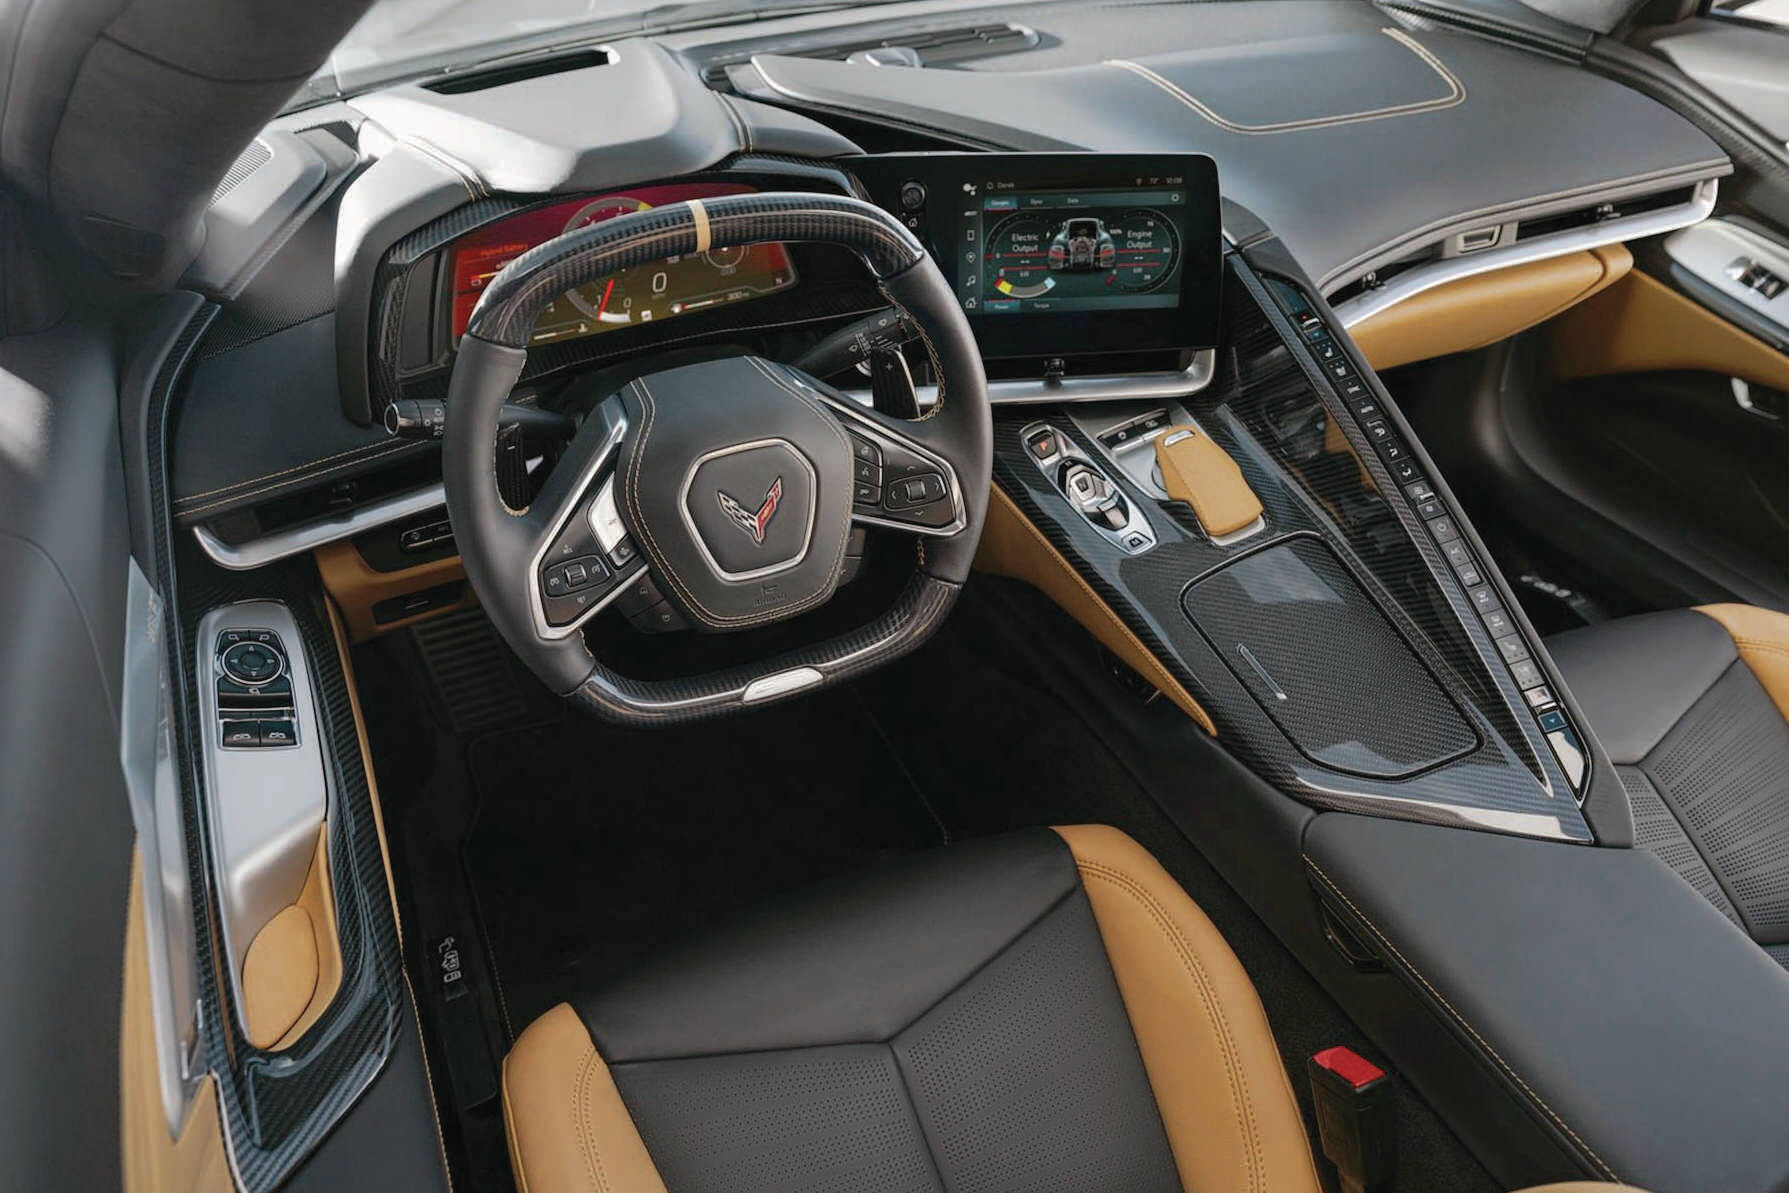 As with the E-Rays exterior, the interior styling is busy. Aside from instrumentation specific to the hybrid function  showing output and of efficiency of the system  the command-centre-style interior is unchanged from other Corvette models. PHOTO: CHEVROLET